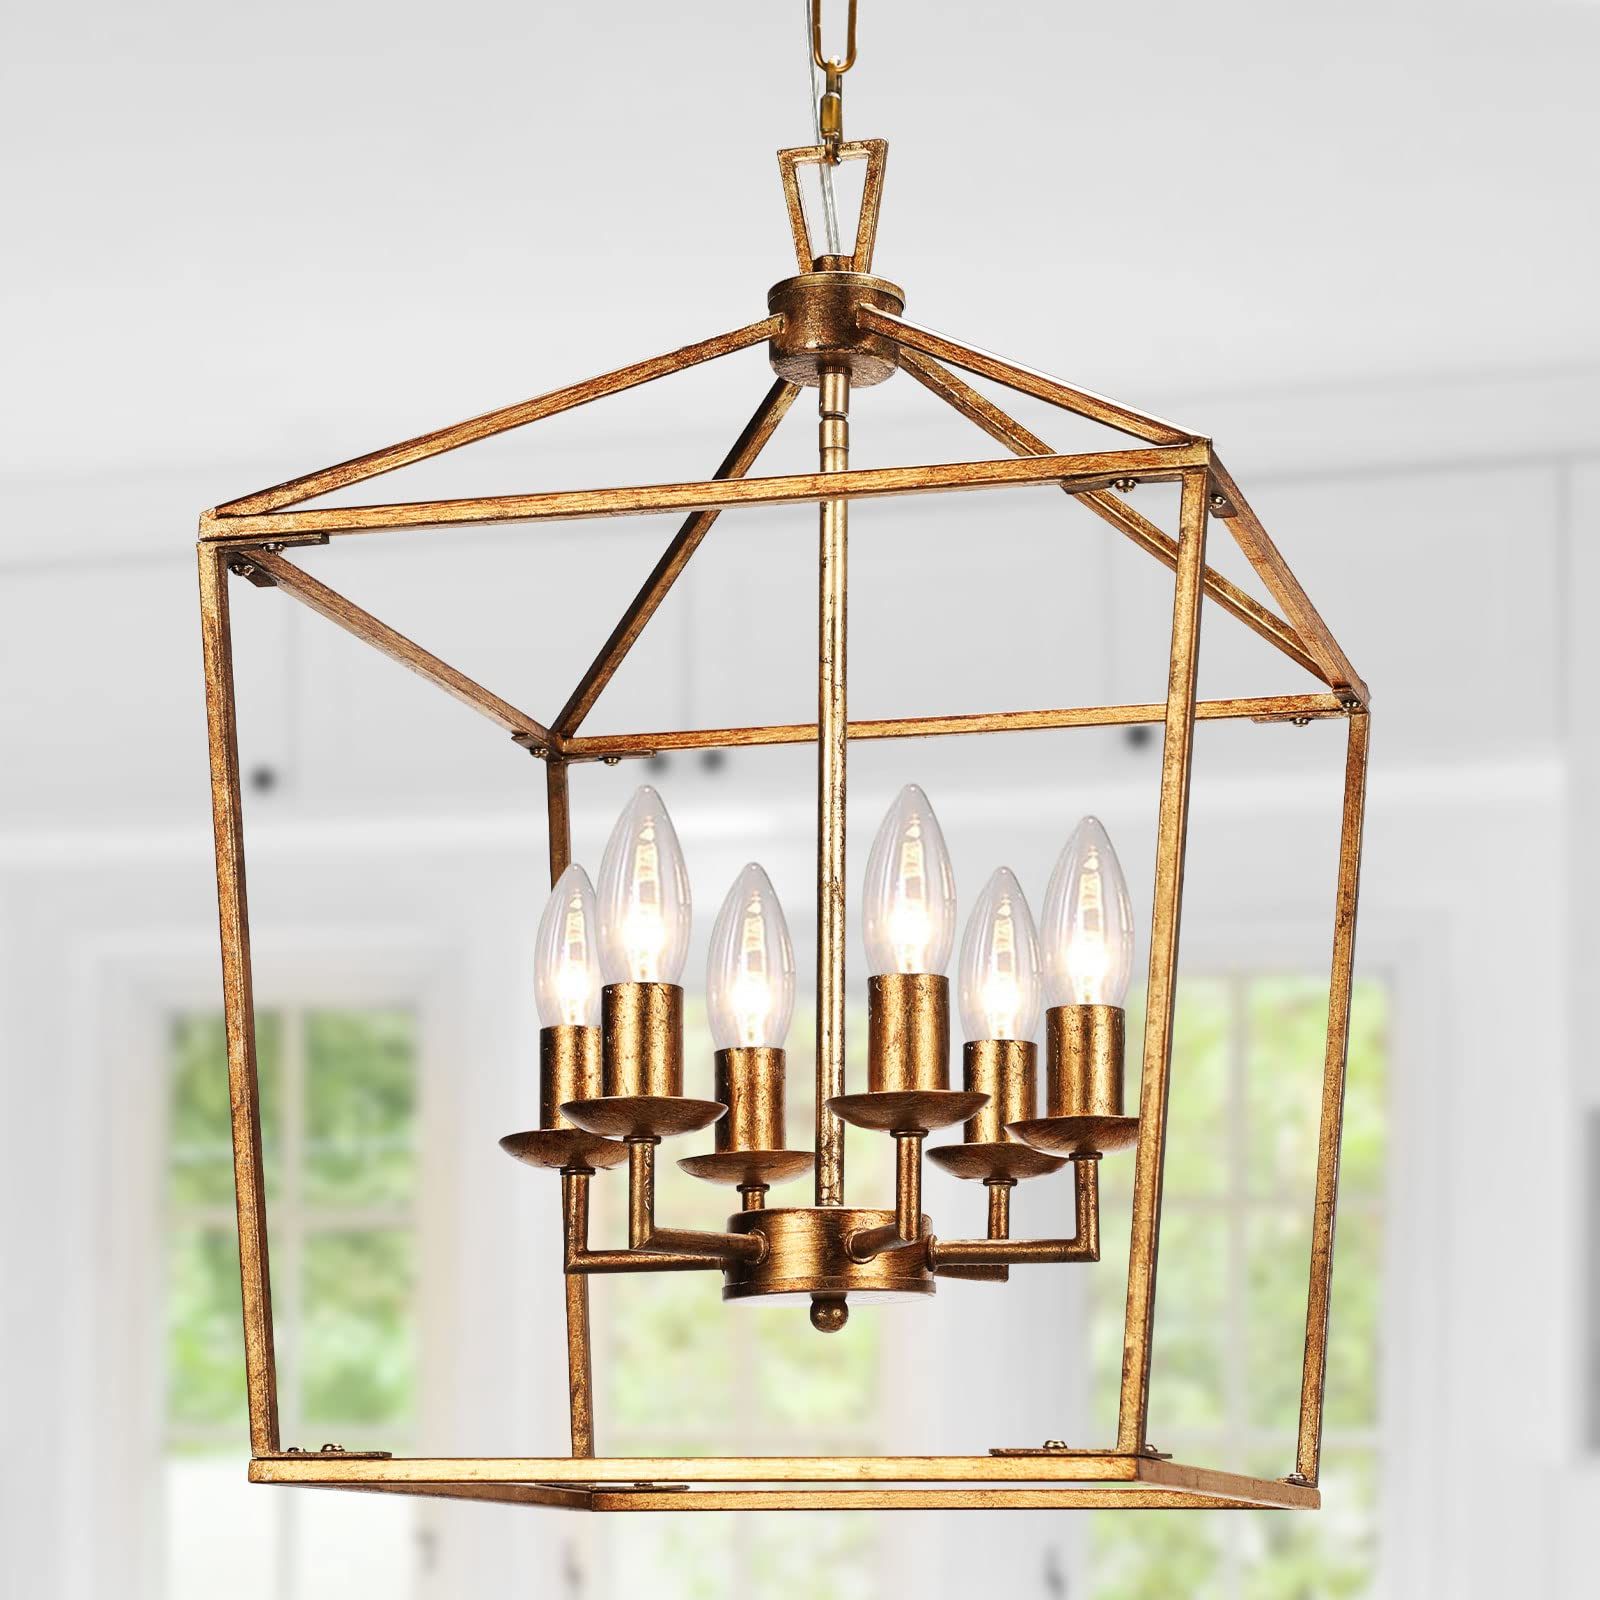 Gild One Light Lantern Chandeliers Intended For Well Liked Gold Chandelier Lantern Light Fixtures – 6 Light Retro Foyer Pendant Light,  Rustic Pendant Lighting For Kitchen Island, Hang Lighting With Adjustable  Chain, Hand Pasted Gold Foil Finish – – Amazon (View 6 of 10)